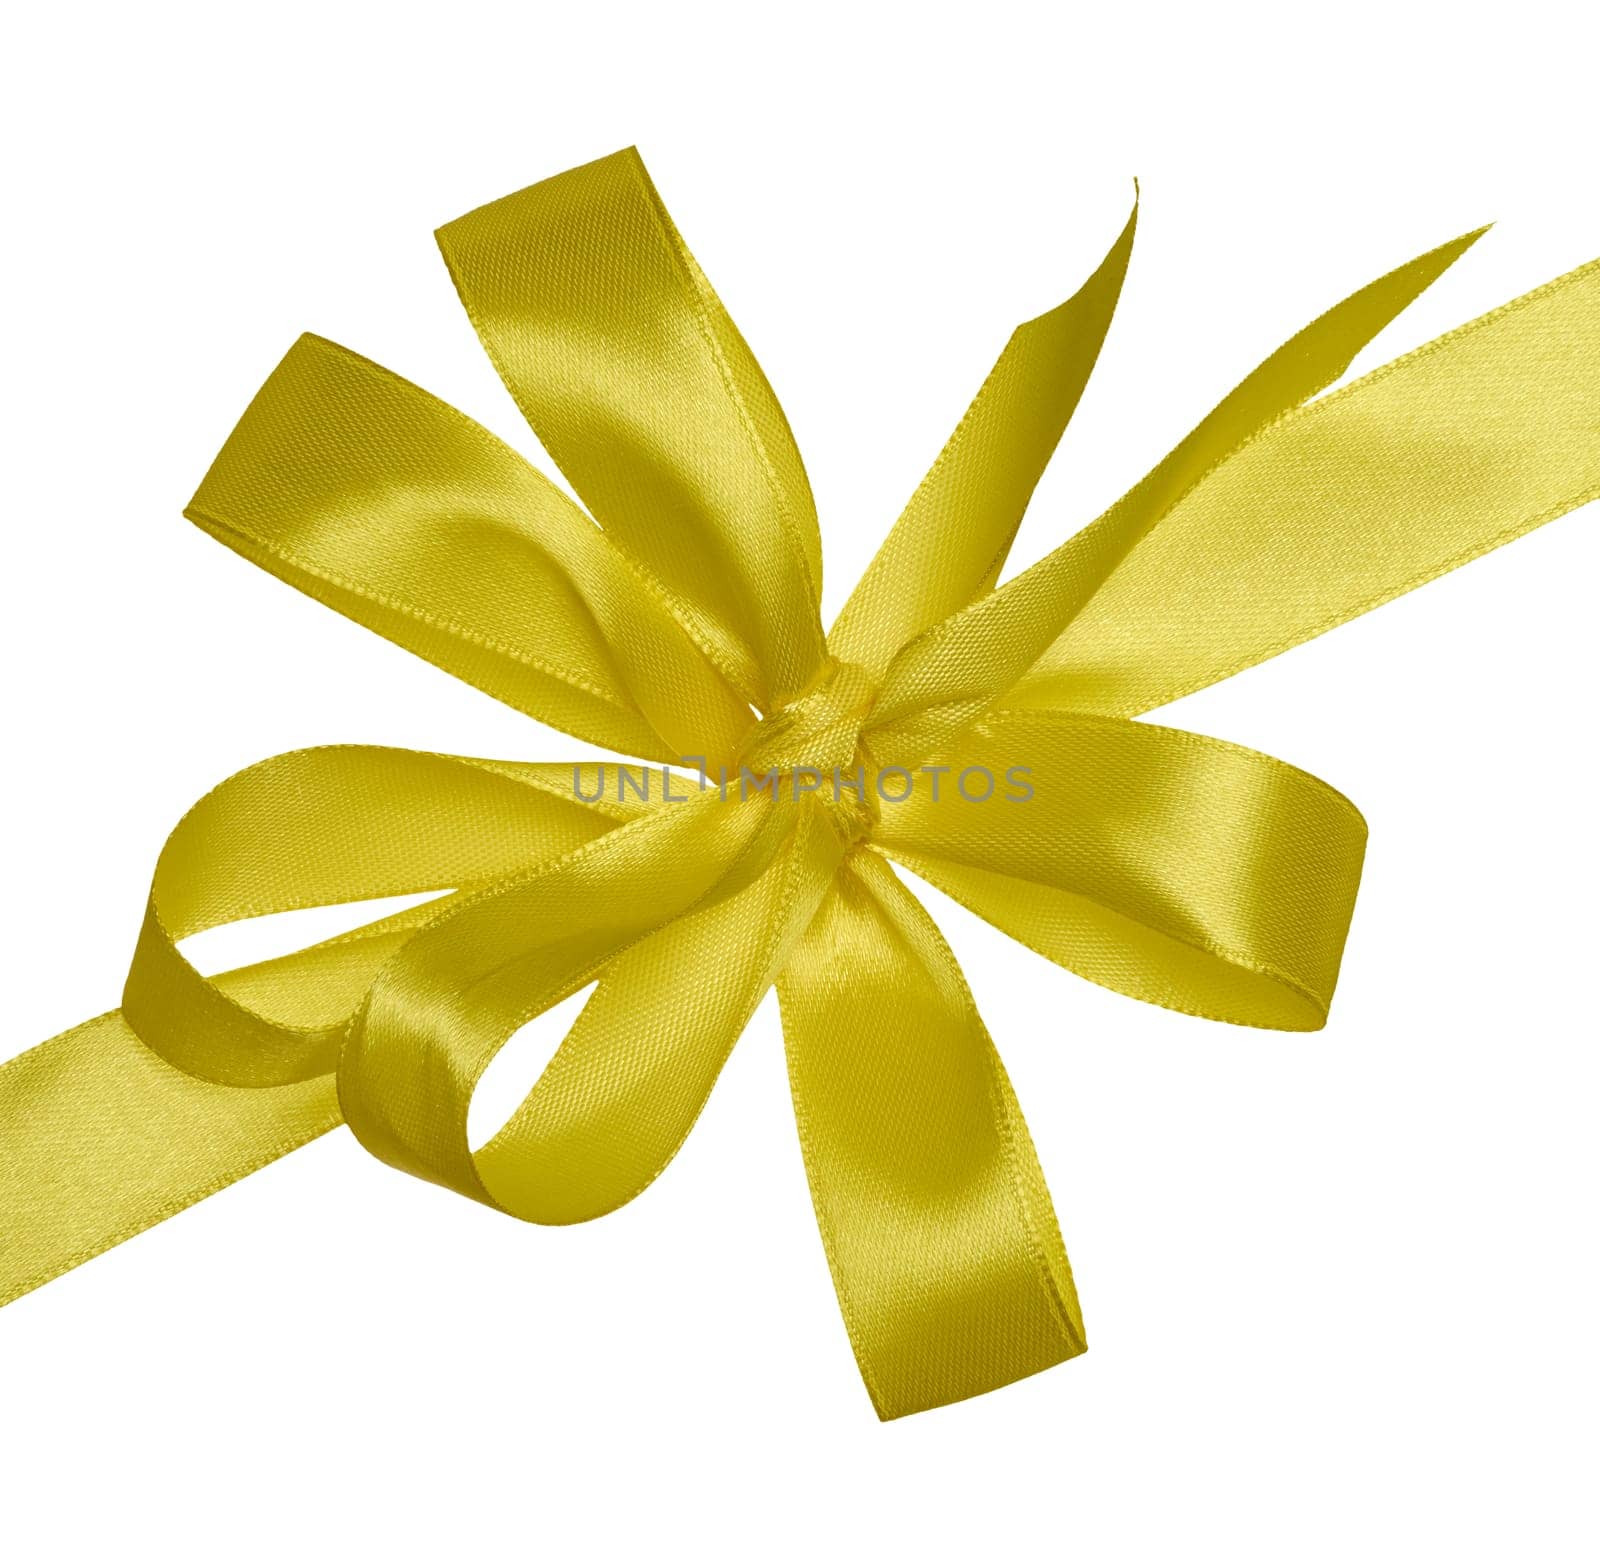 Knotted yellow silk ribbon in a bow on an isolated background, decor for a gift